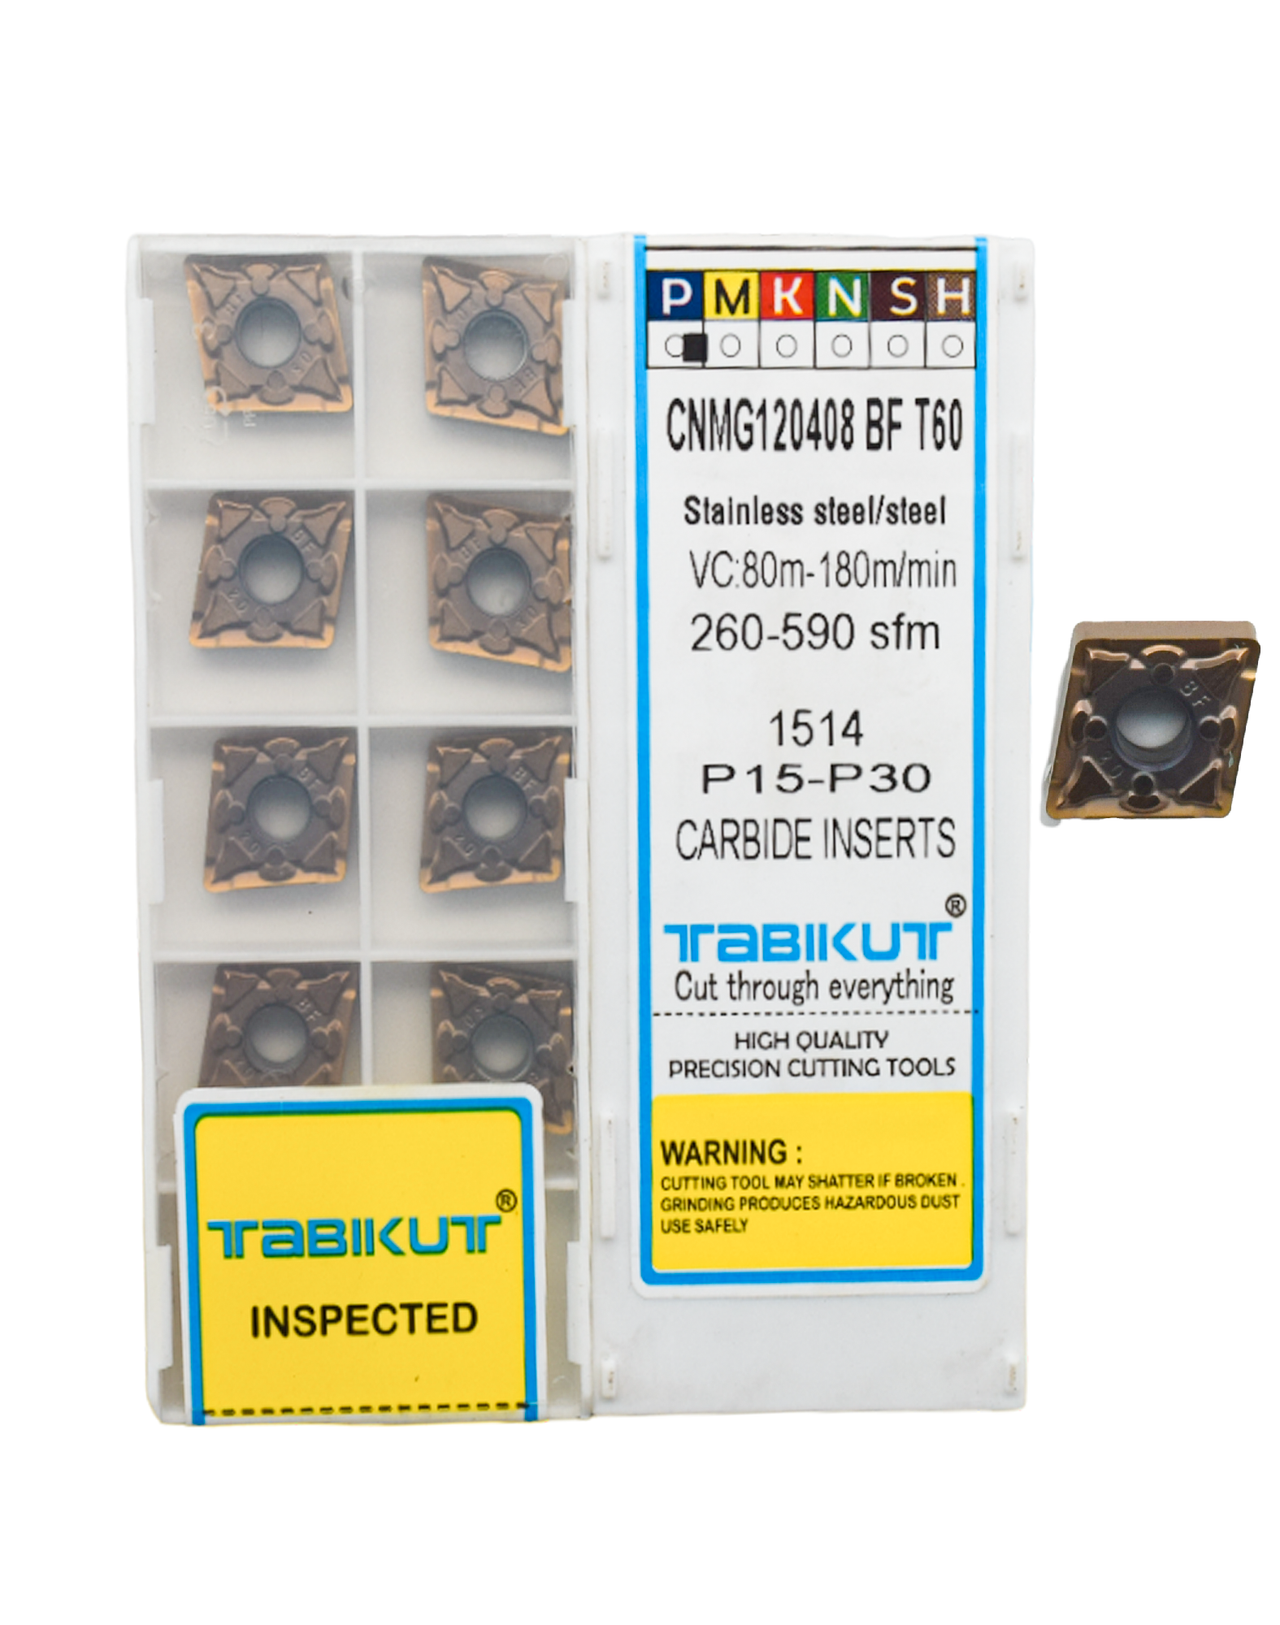 CNMG120404/08/12 BF T60 Stainless Steel grade of Tabikut pack of 10